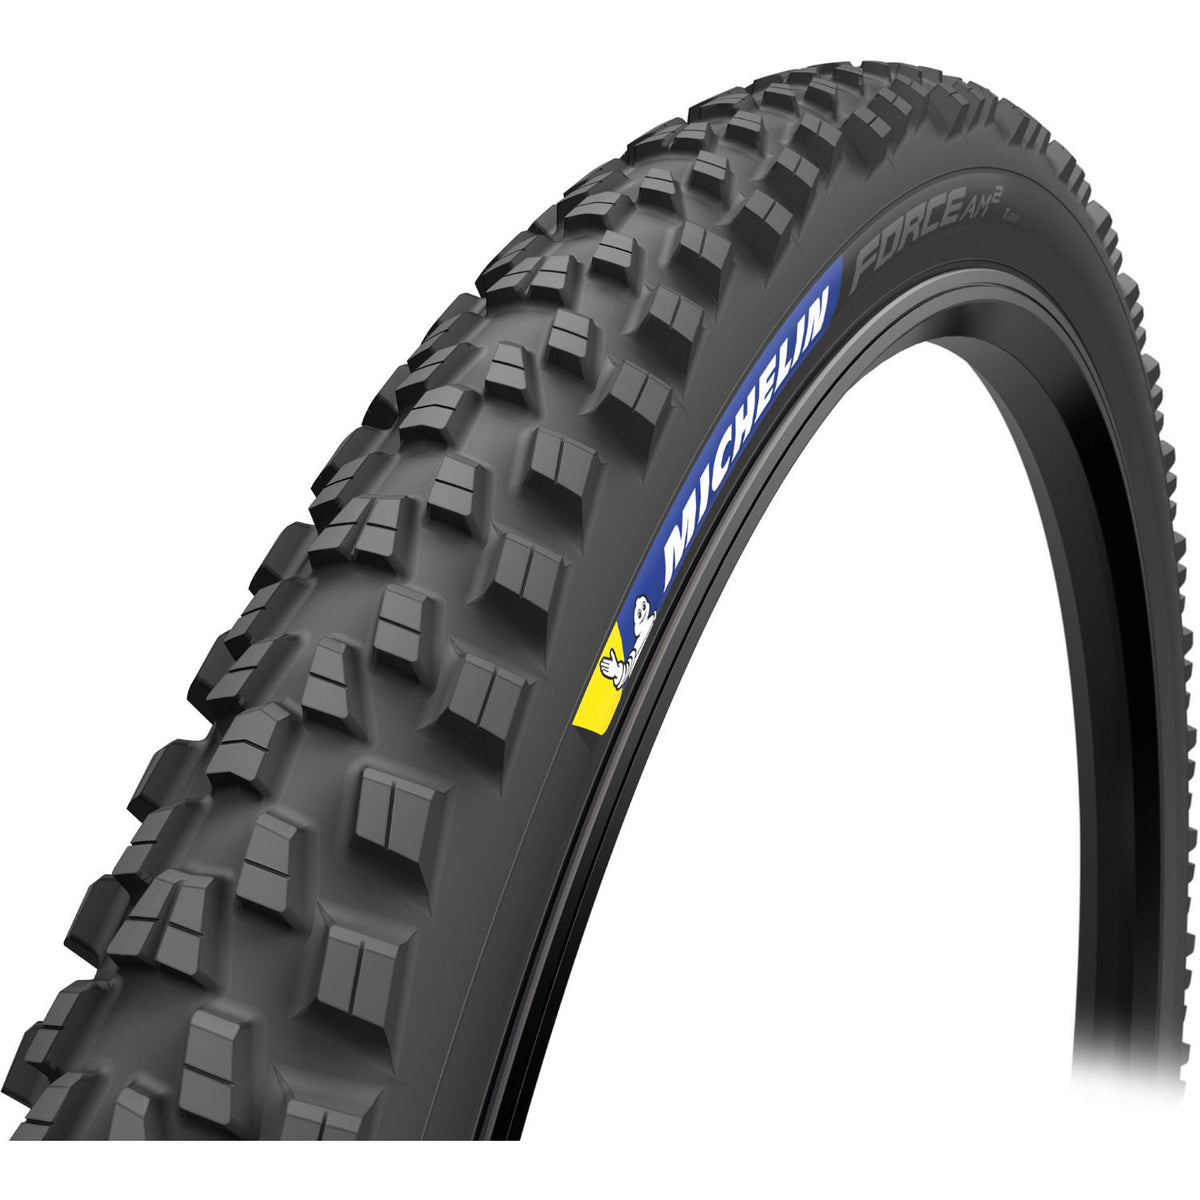 Michelin Force AM2 Competition Line MTB Tyre